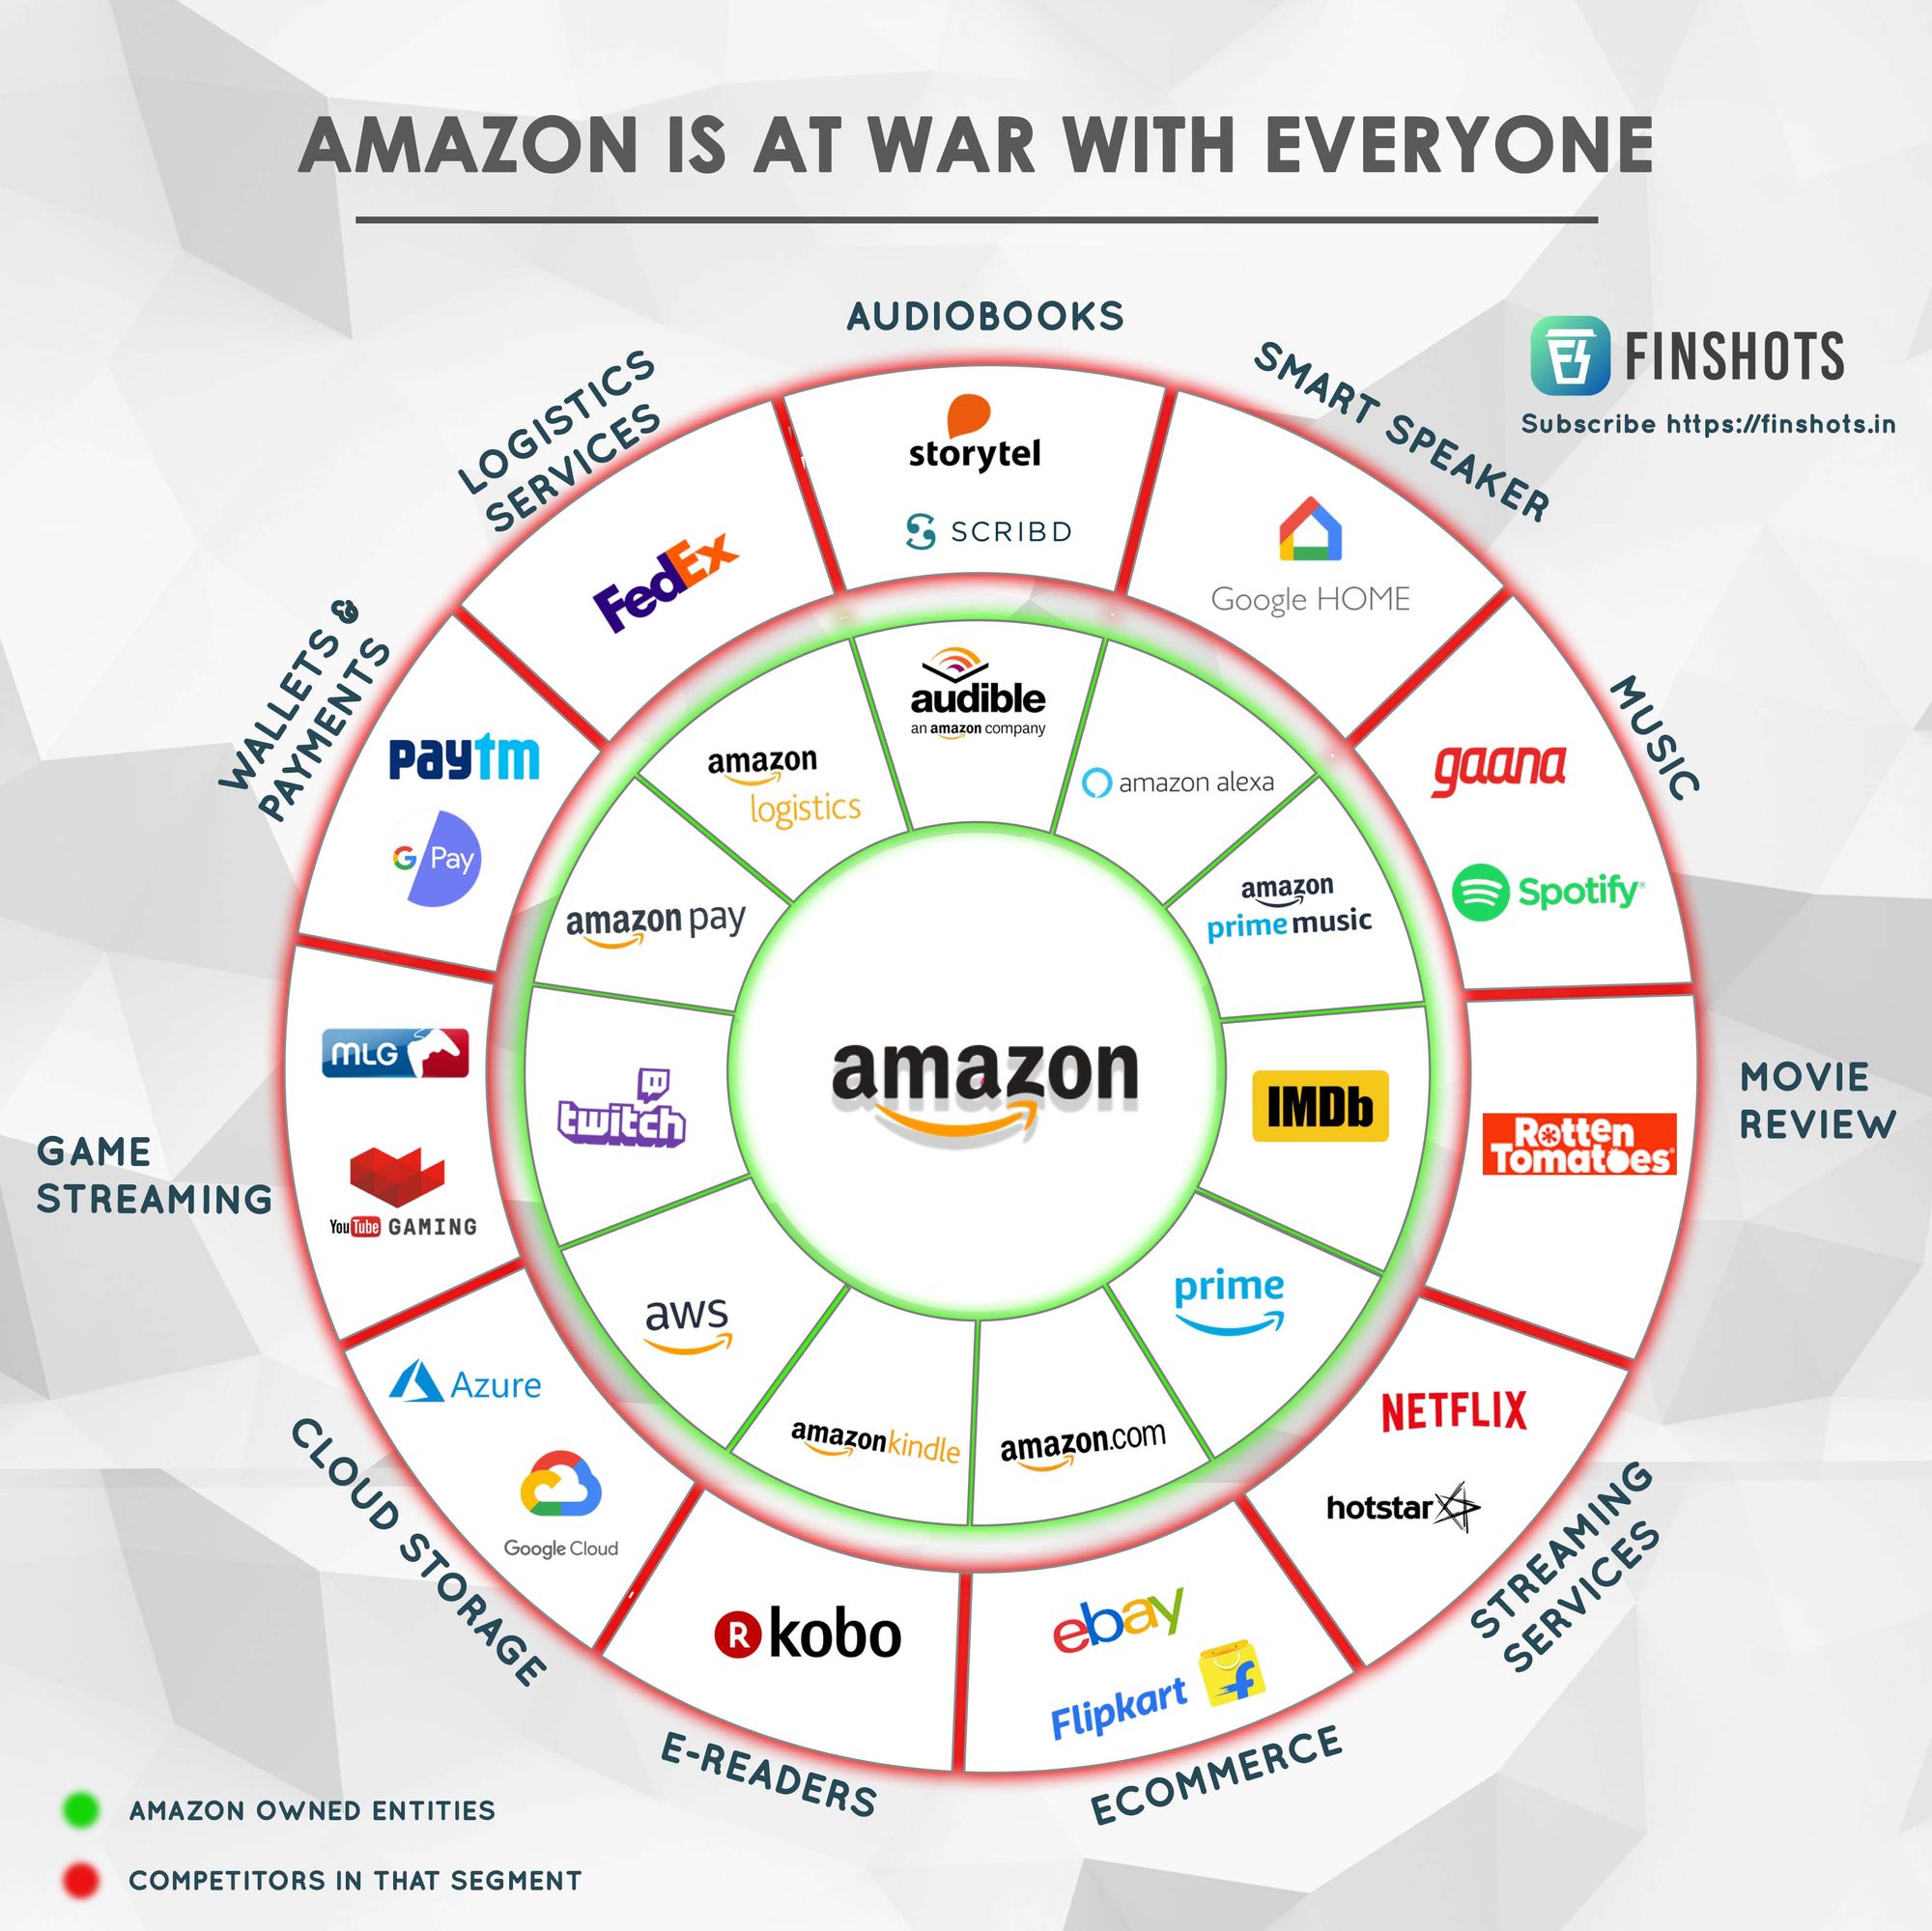 Amazon-is-at-war-with-everyone (c) finshots.in/infographic/amazon-is-at-war-with-everyone